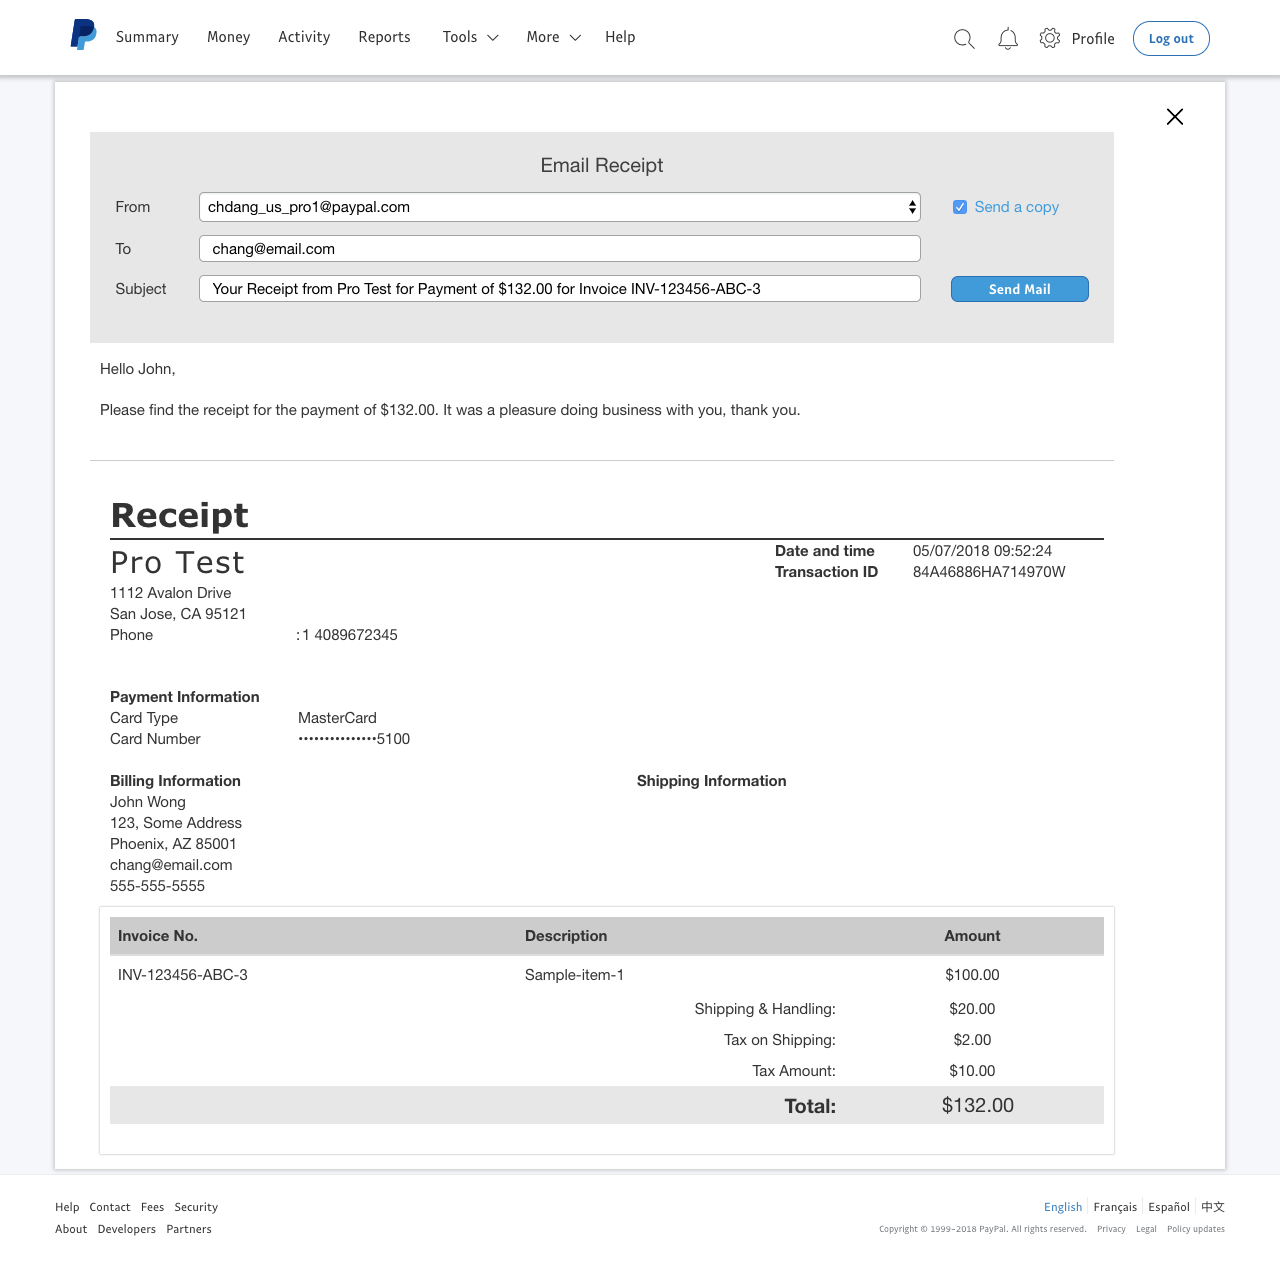 Email Receipt page